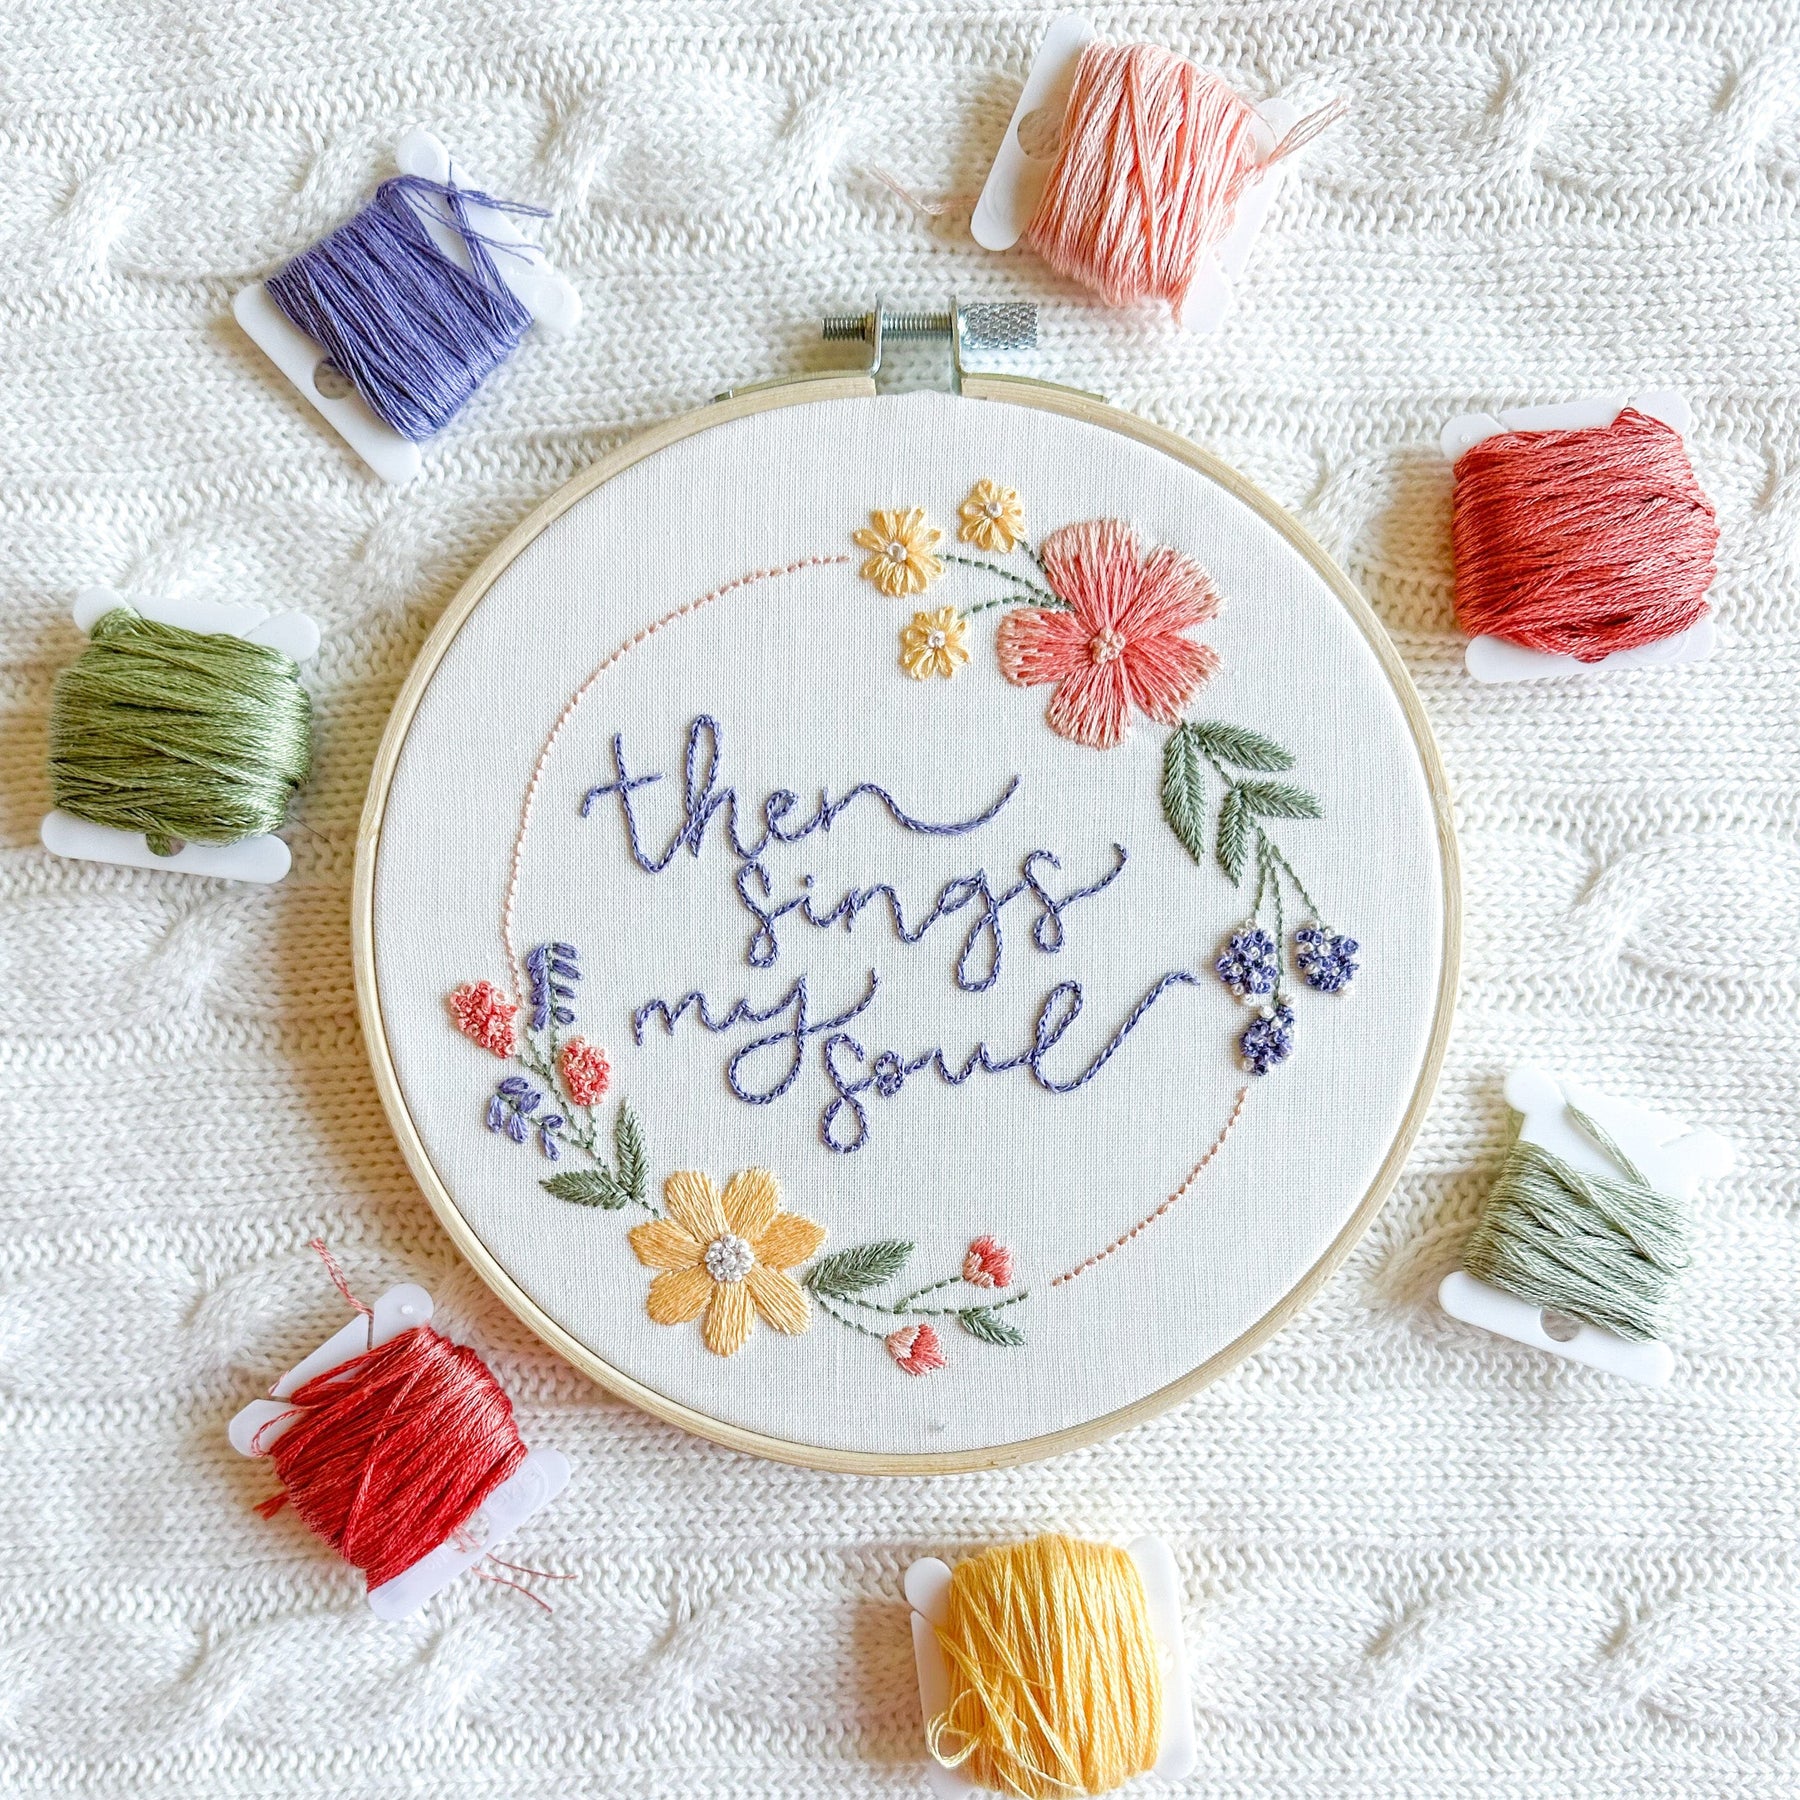 Bind My Wandering by Heart to Thee” Embroidery Kit